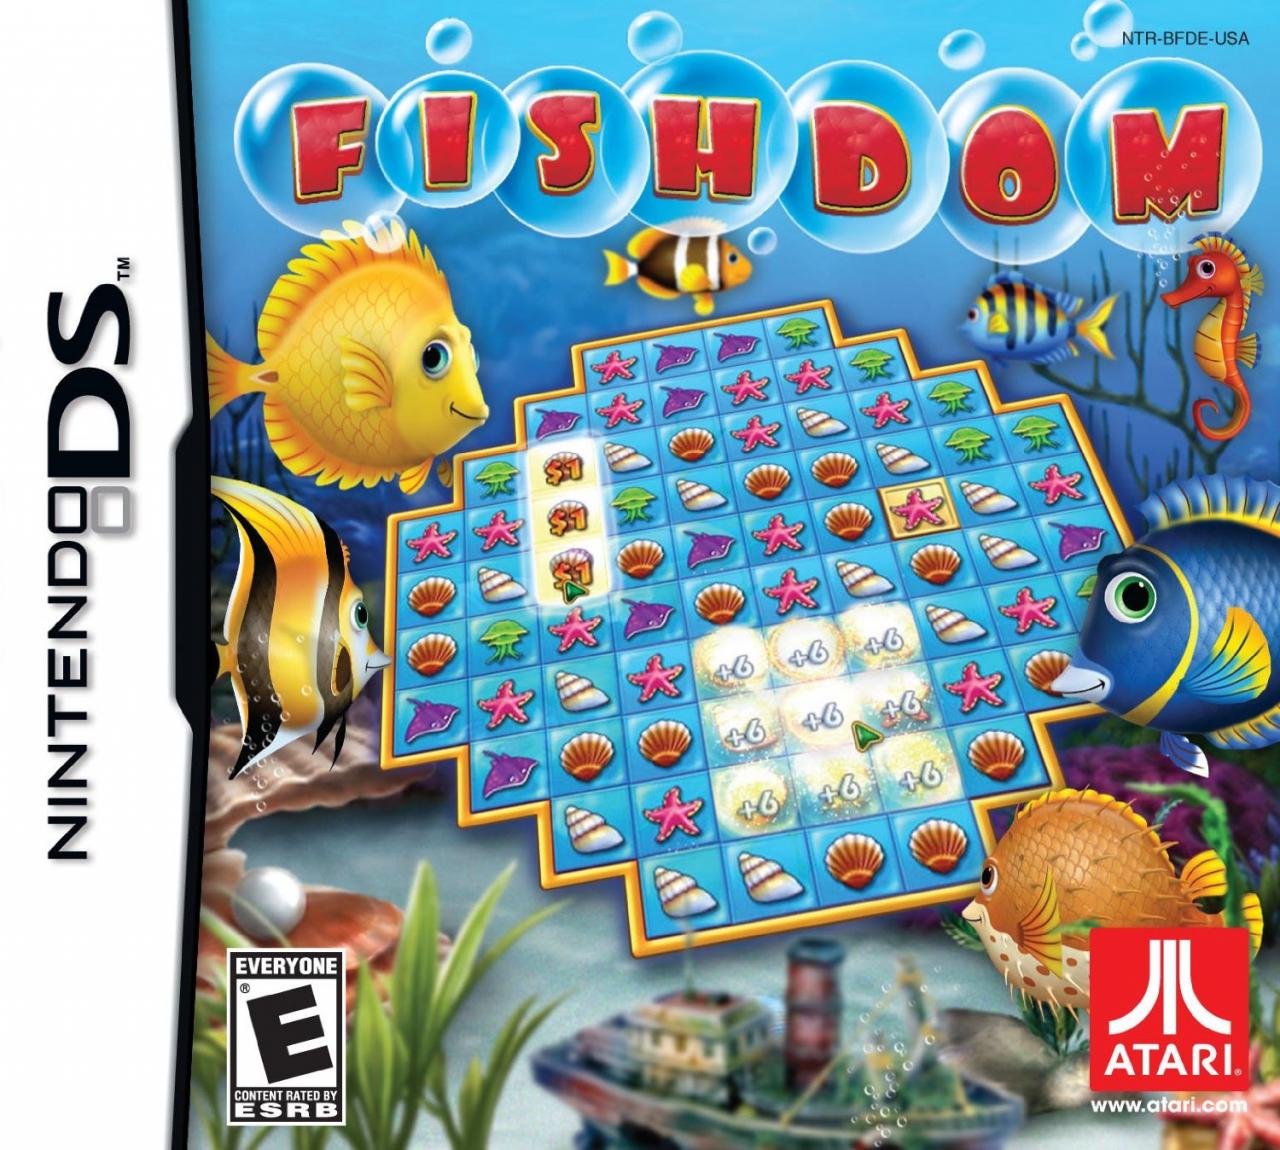 can i play fishdom on my computer